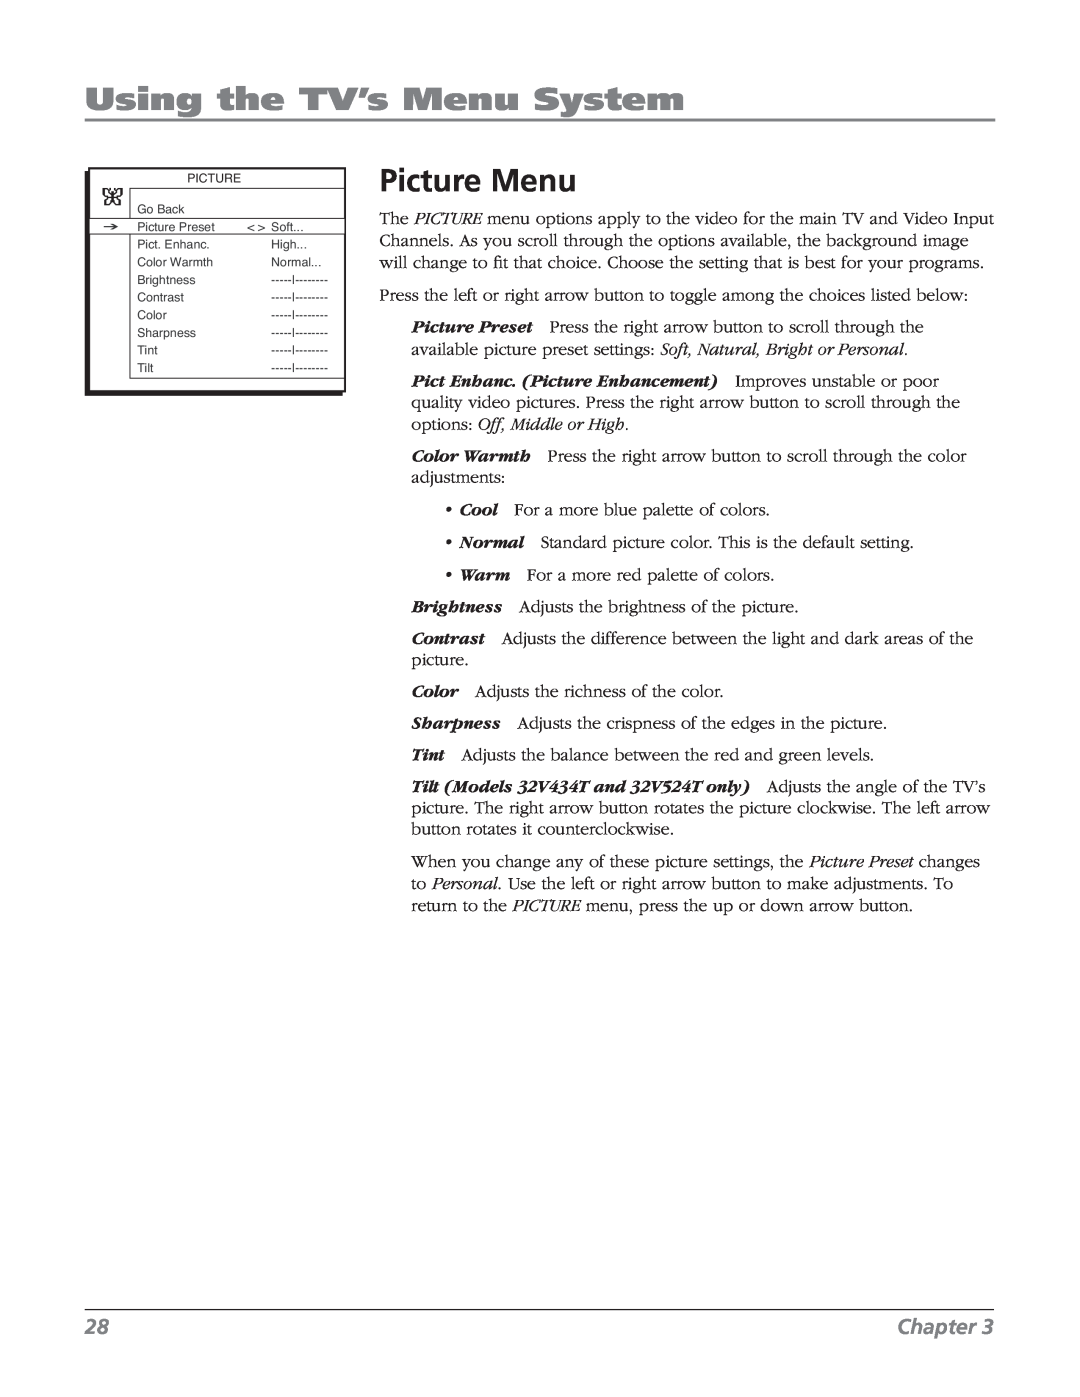 RCA 32V524T, 32v434t manual Picture Menu, Using the TV’s Menu System, Chapter 